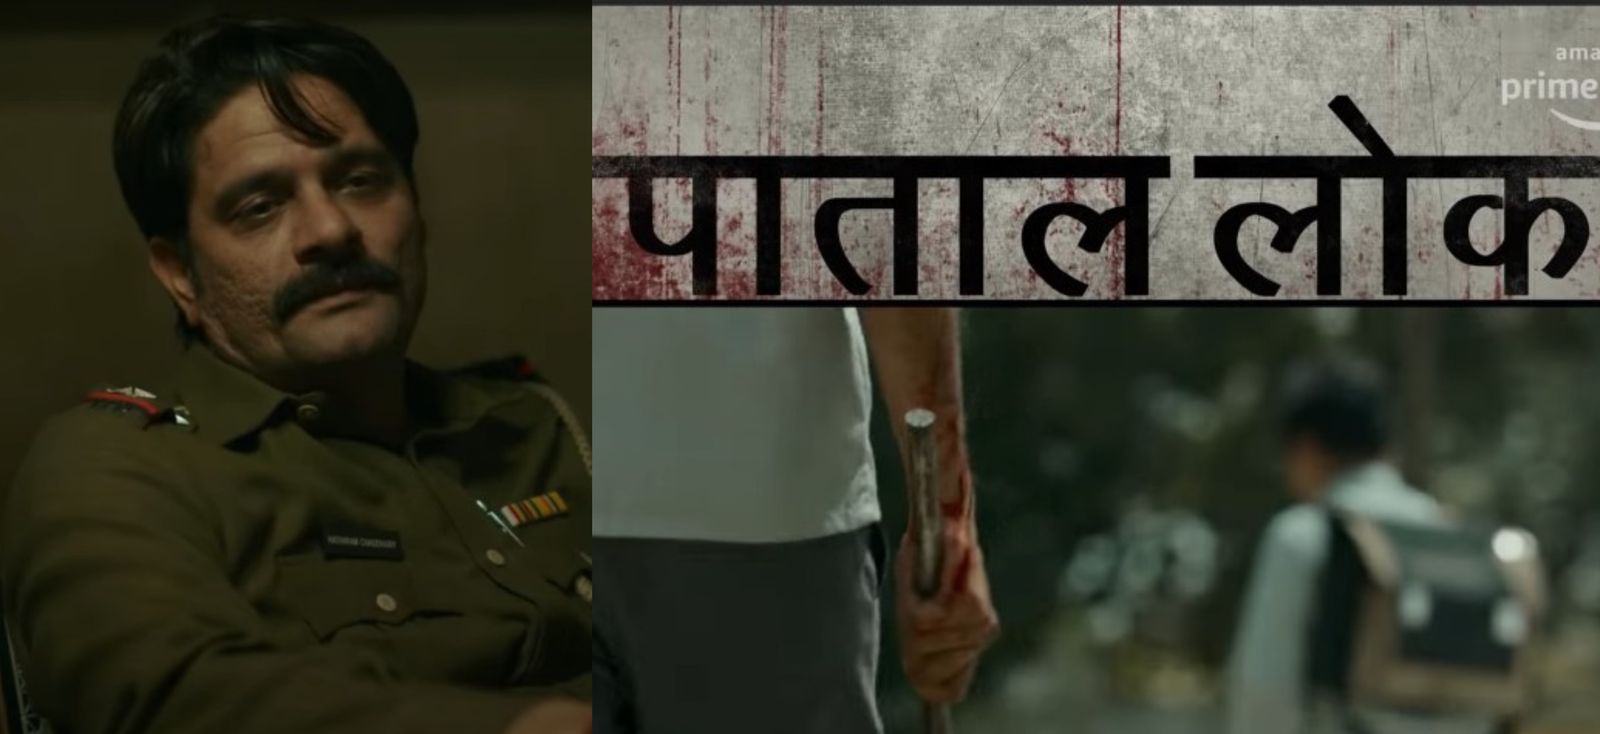 Paatal Lok Trailer: Jaideep Ahlawat’s Powerful Performance And The Gripping Story Line Make It A Must-Watch